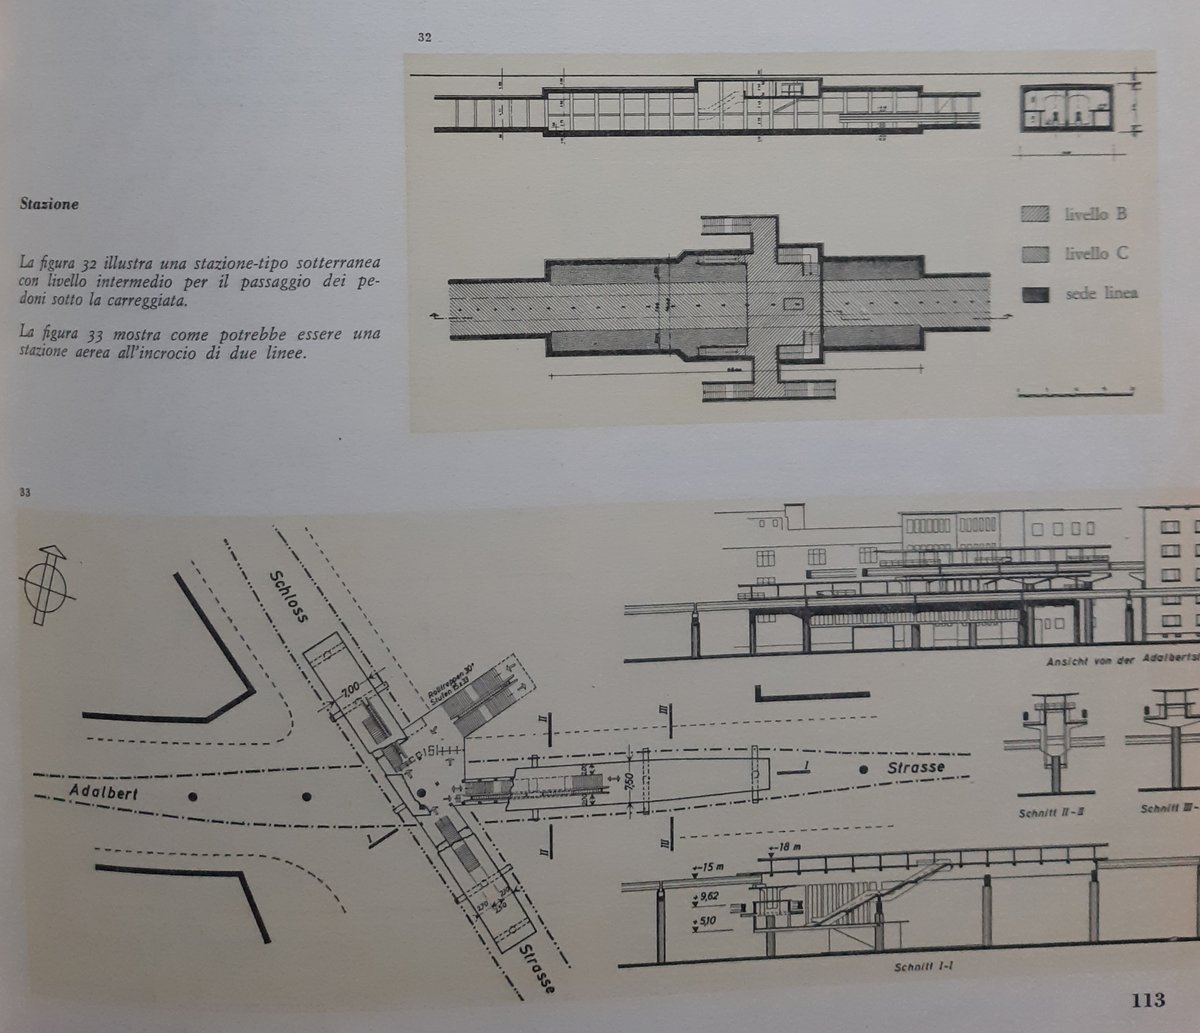 10/ To finish, diagrams of urban insertion for tramways and "Alweg" monorail different alignements and stations.